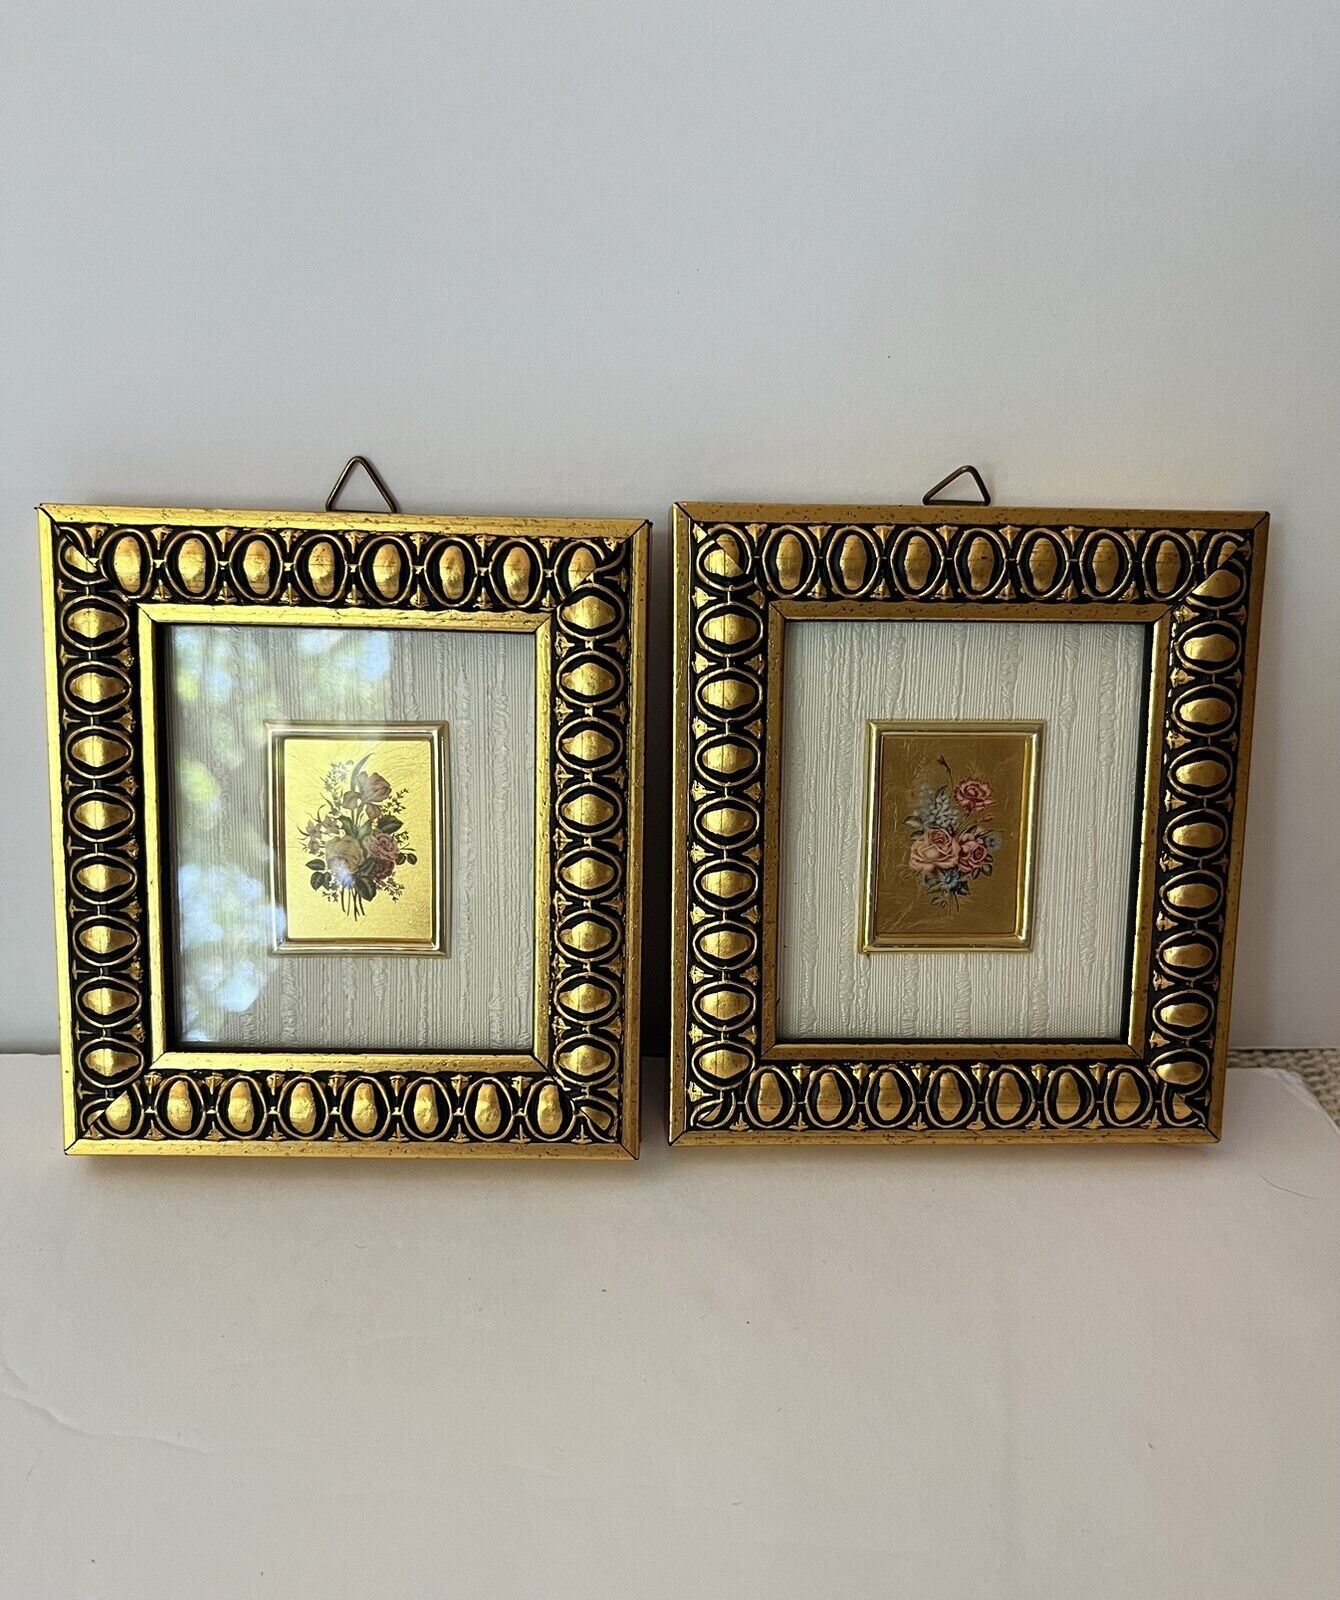 Vintage Mini Framed Picture Gold Leaf Art Made In Italy Gold Tone and Black